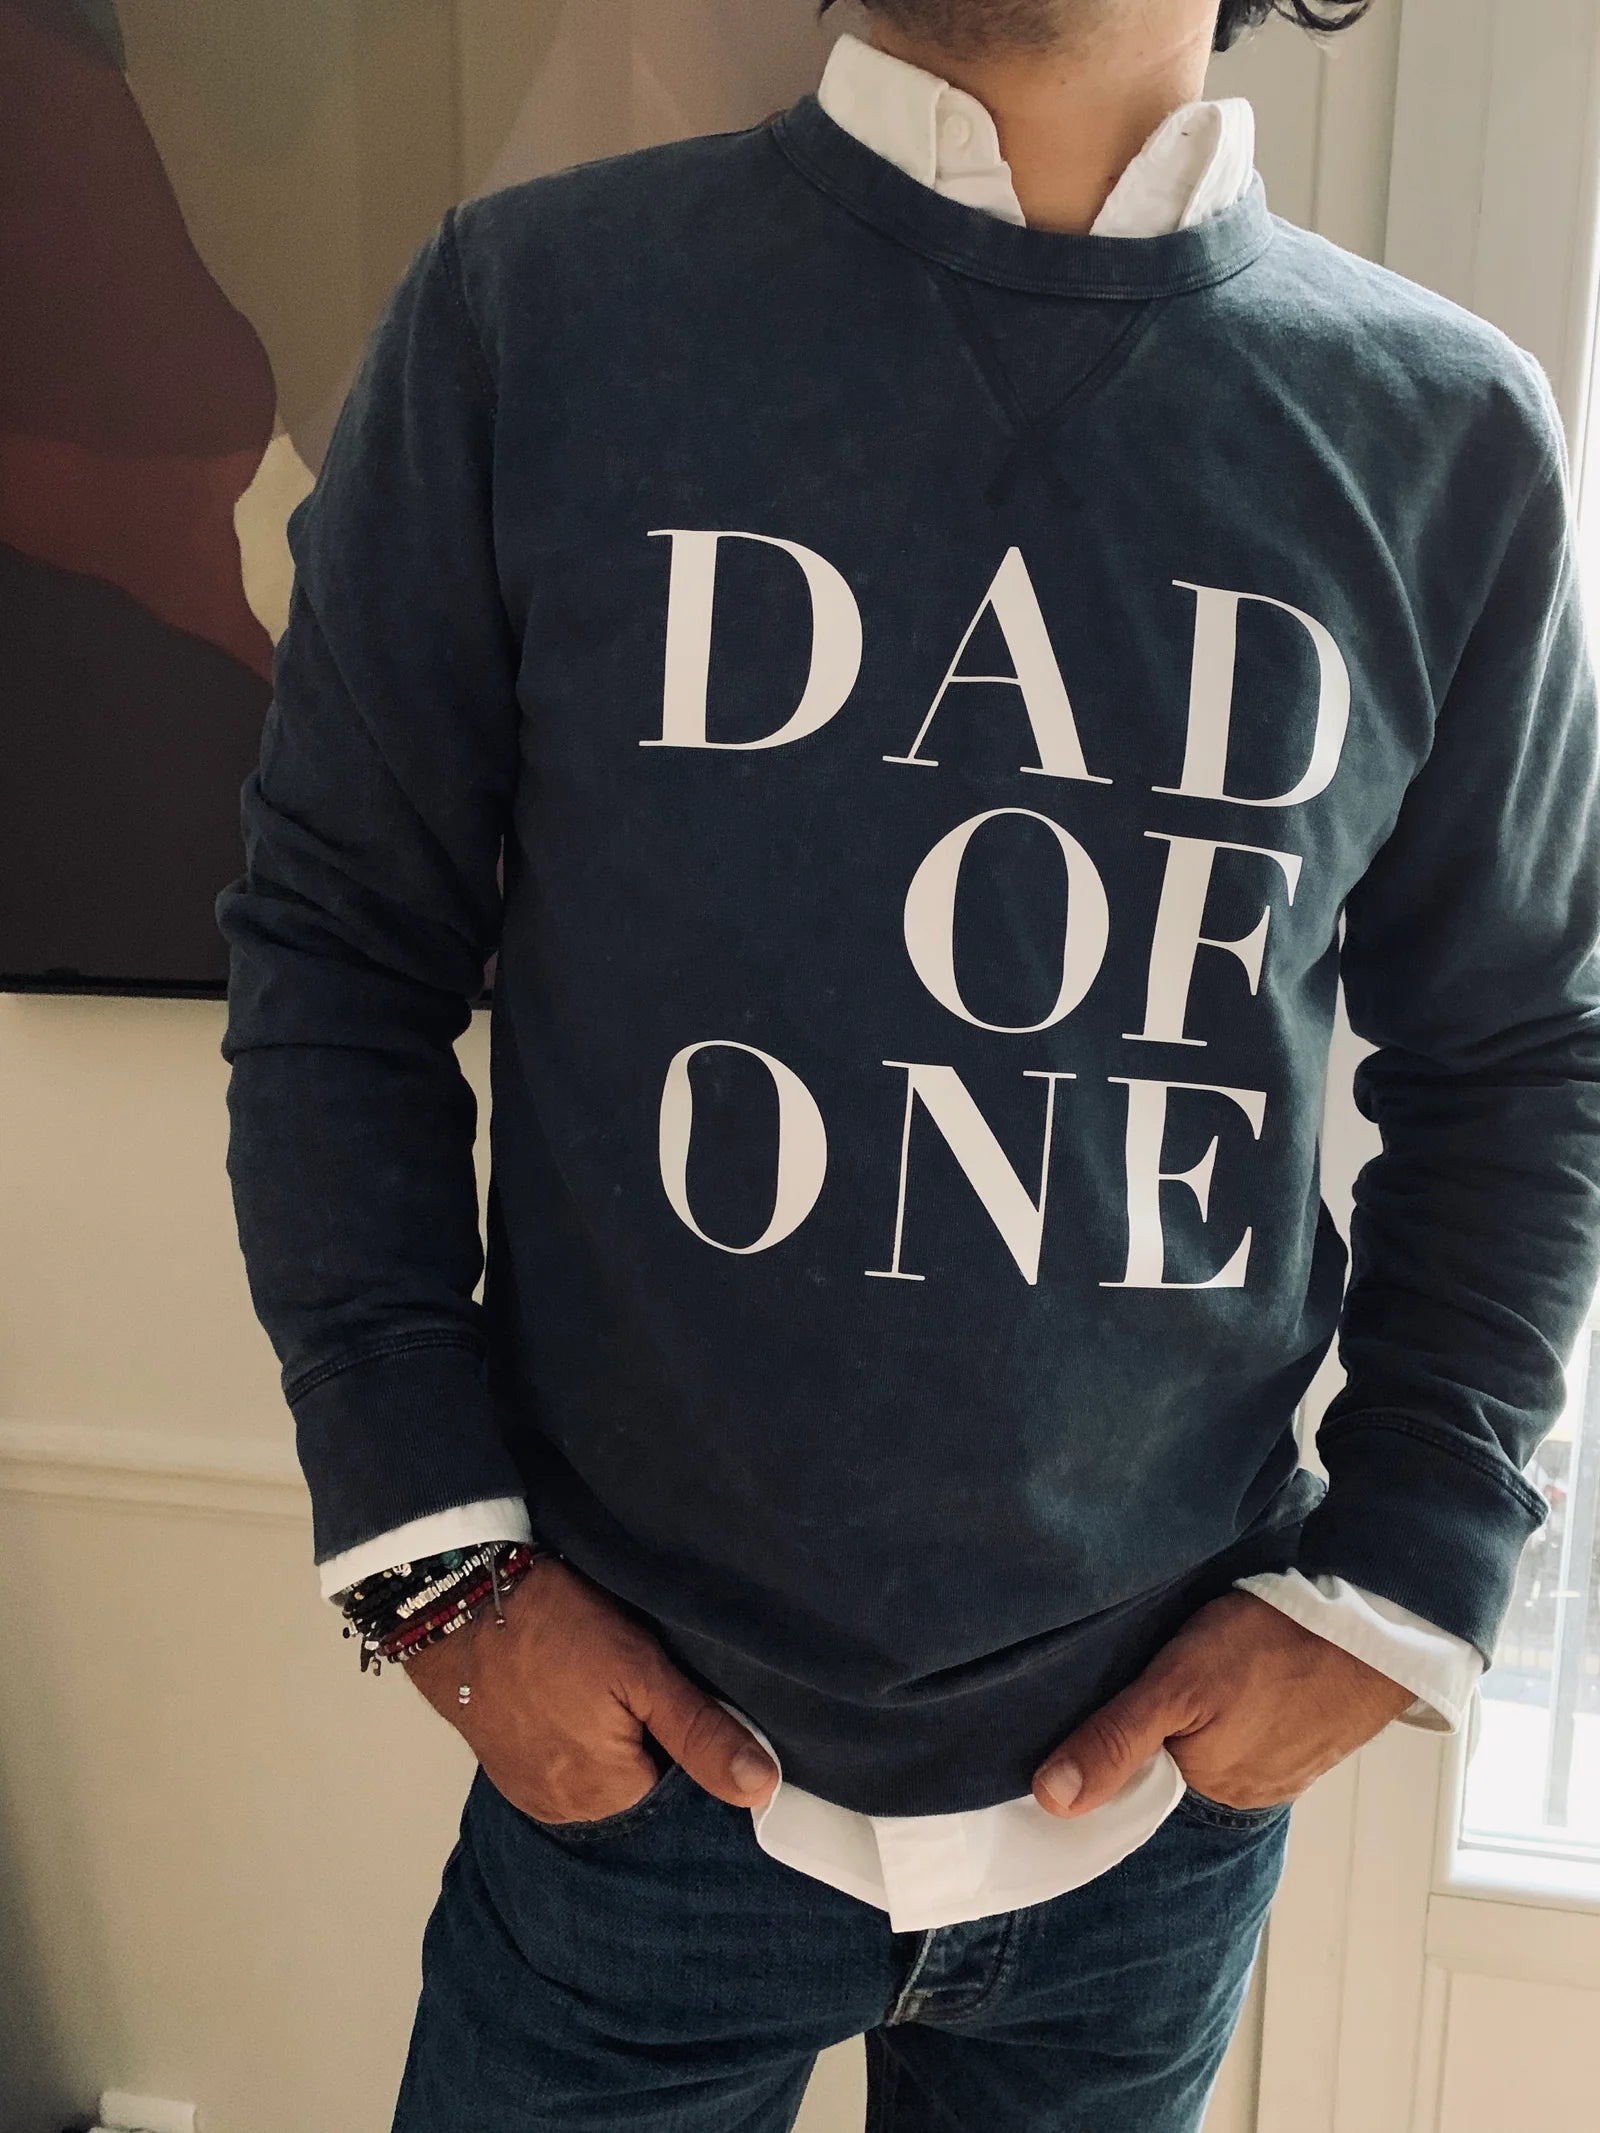 A Sweat-shirt ANTHRACITE DAD OF TWO